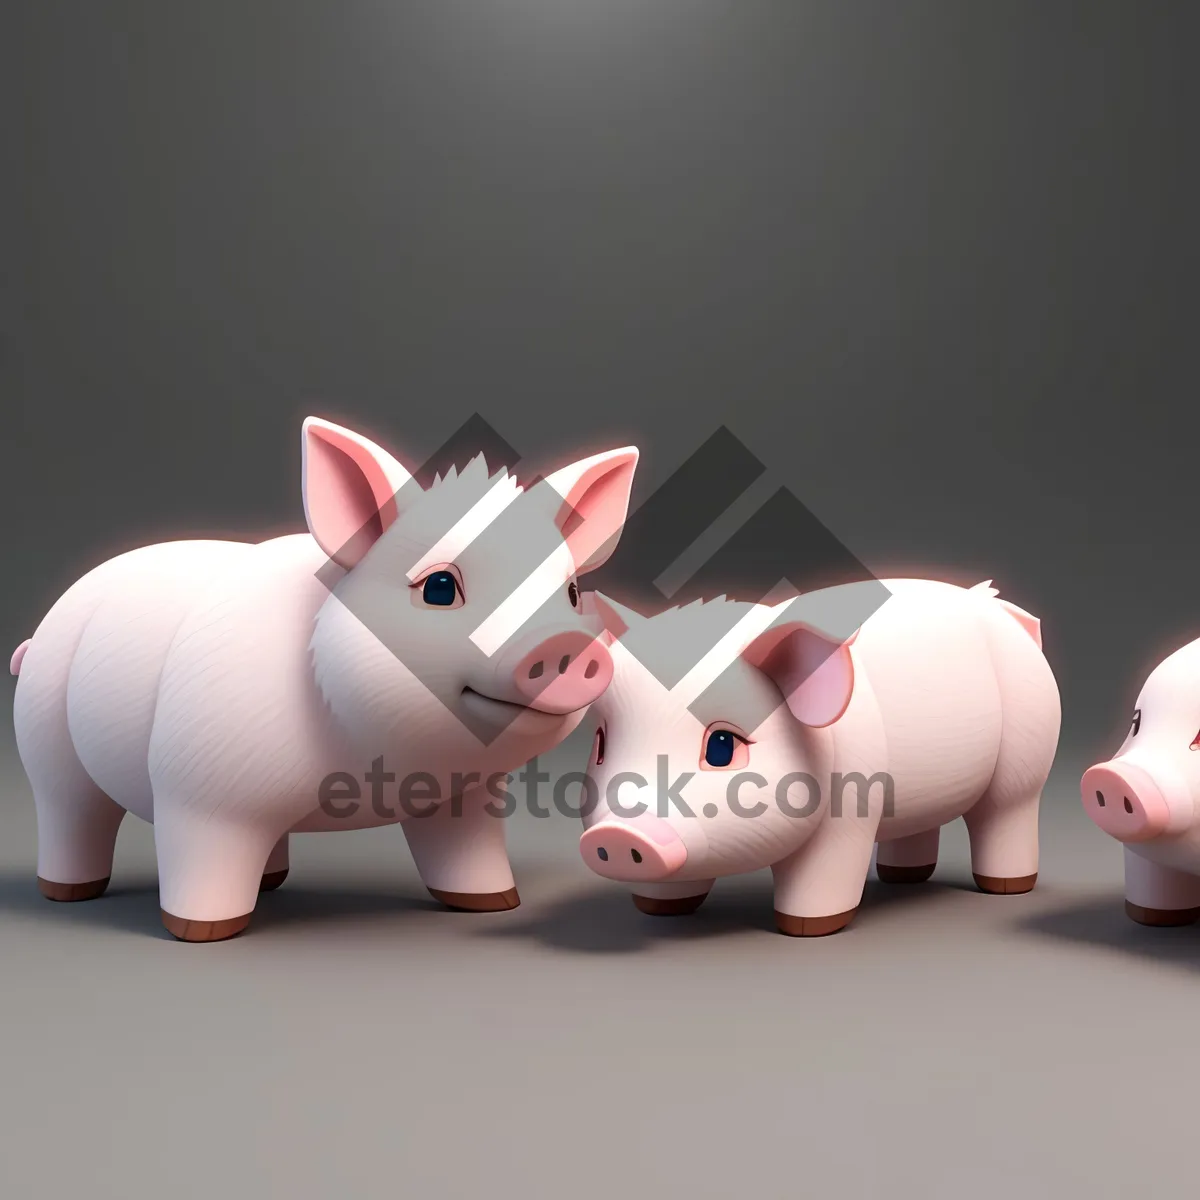 Picture of Piggy Bank Savings: Grow Your Wealth with Smart Financing